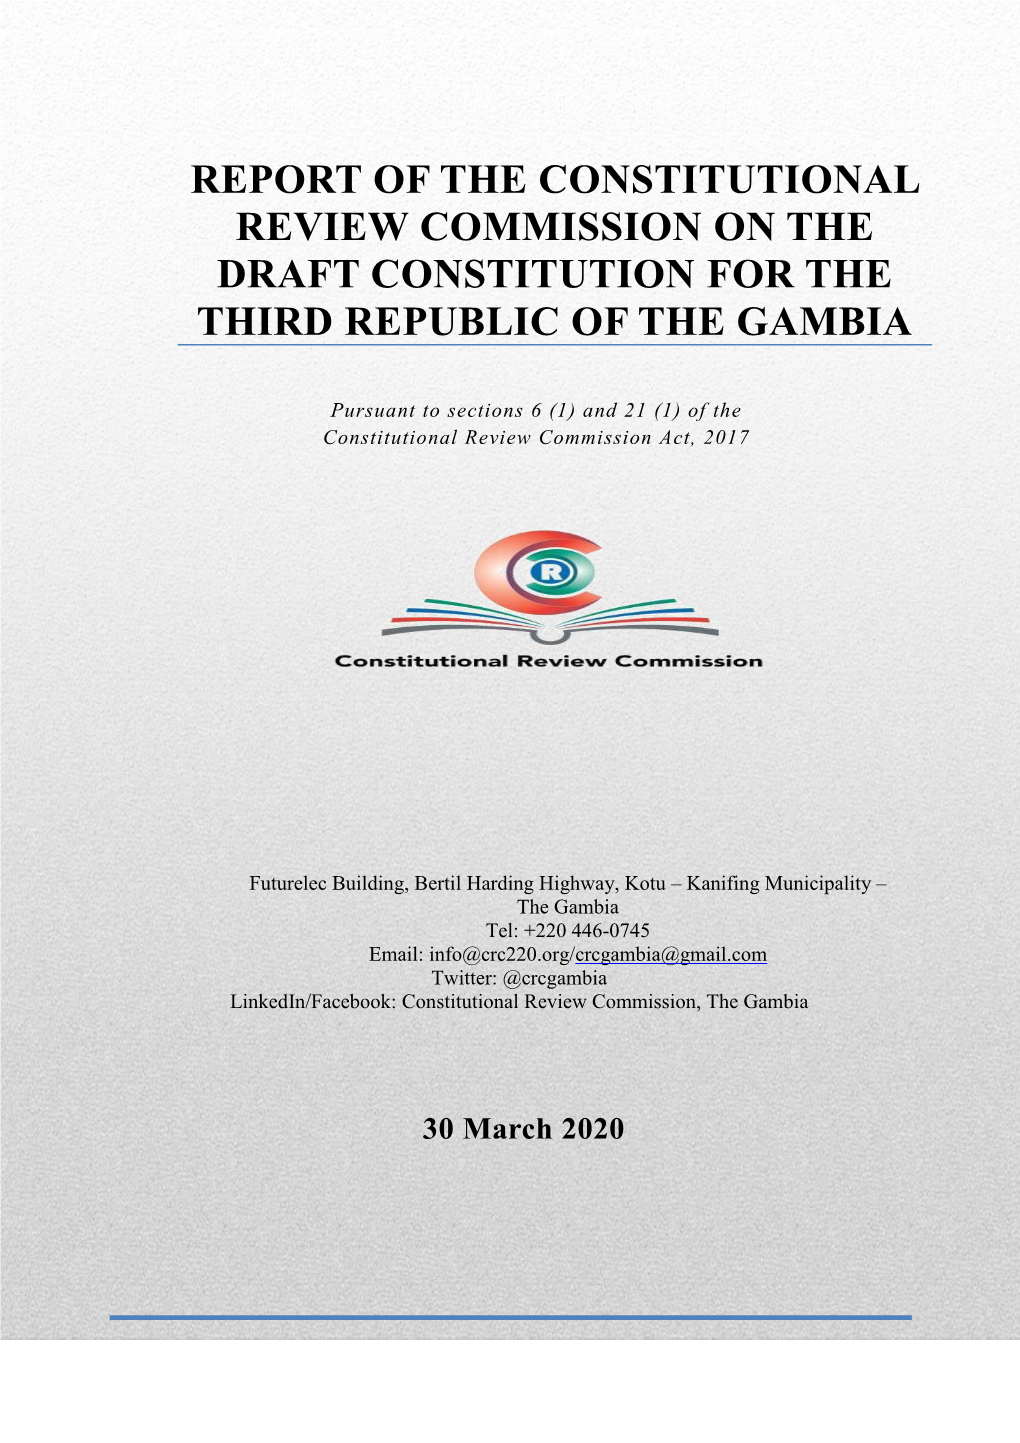 Report of the Constitutional Review Commission on the Draft Constitution for the Third Republic of the Gambia